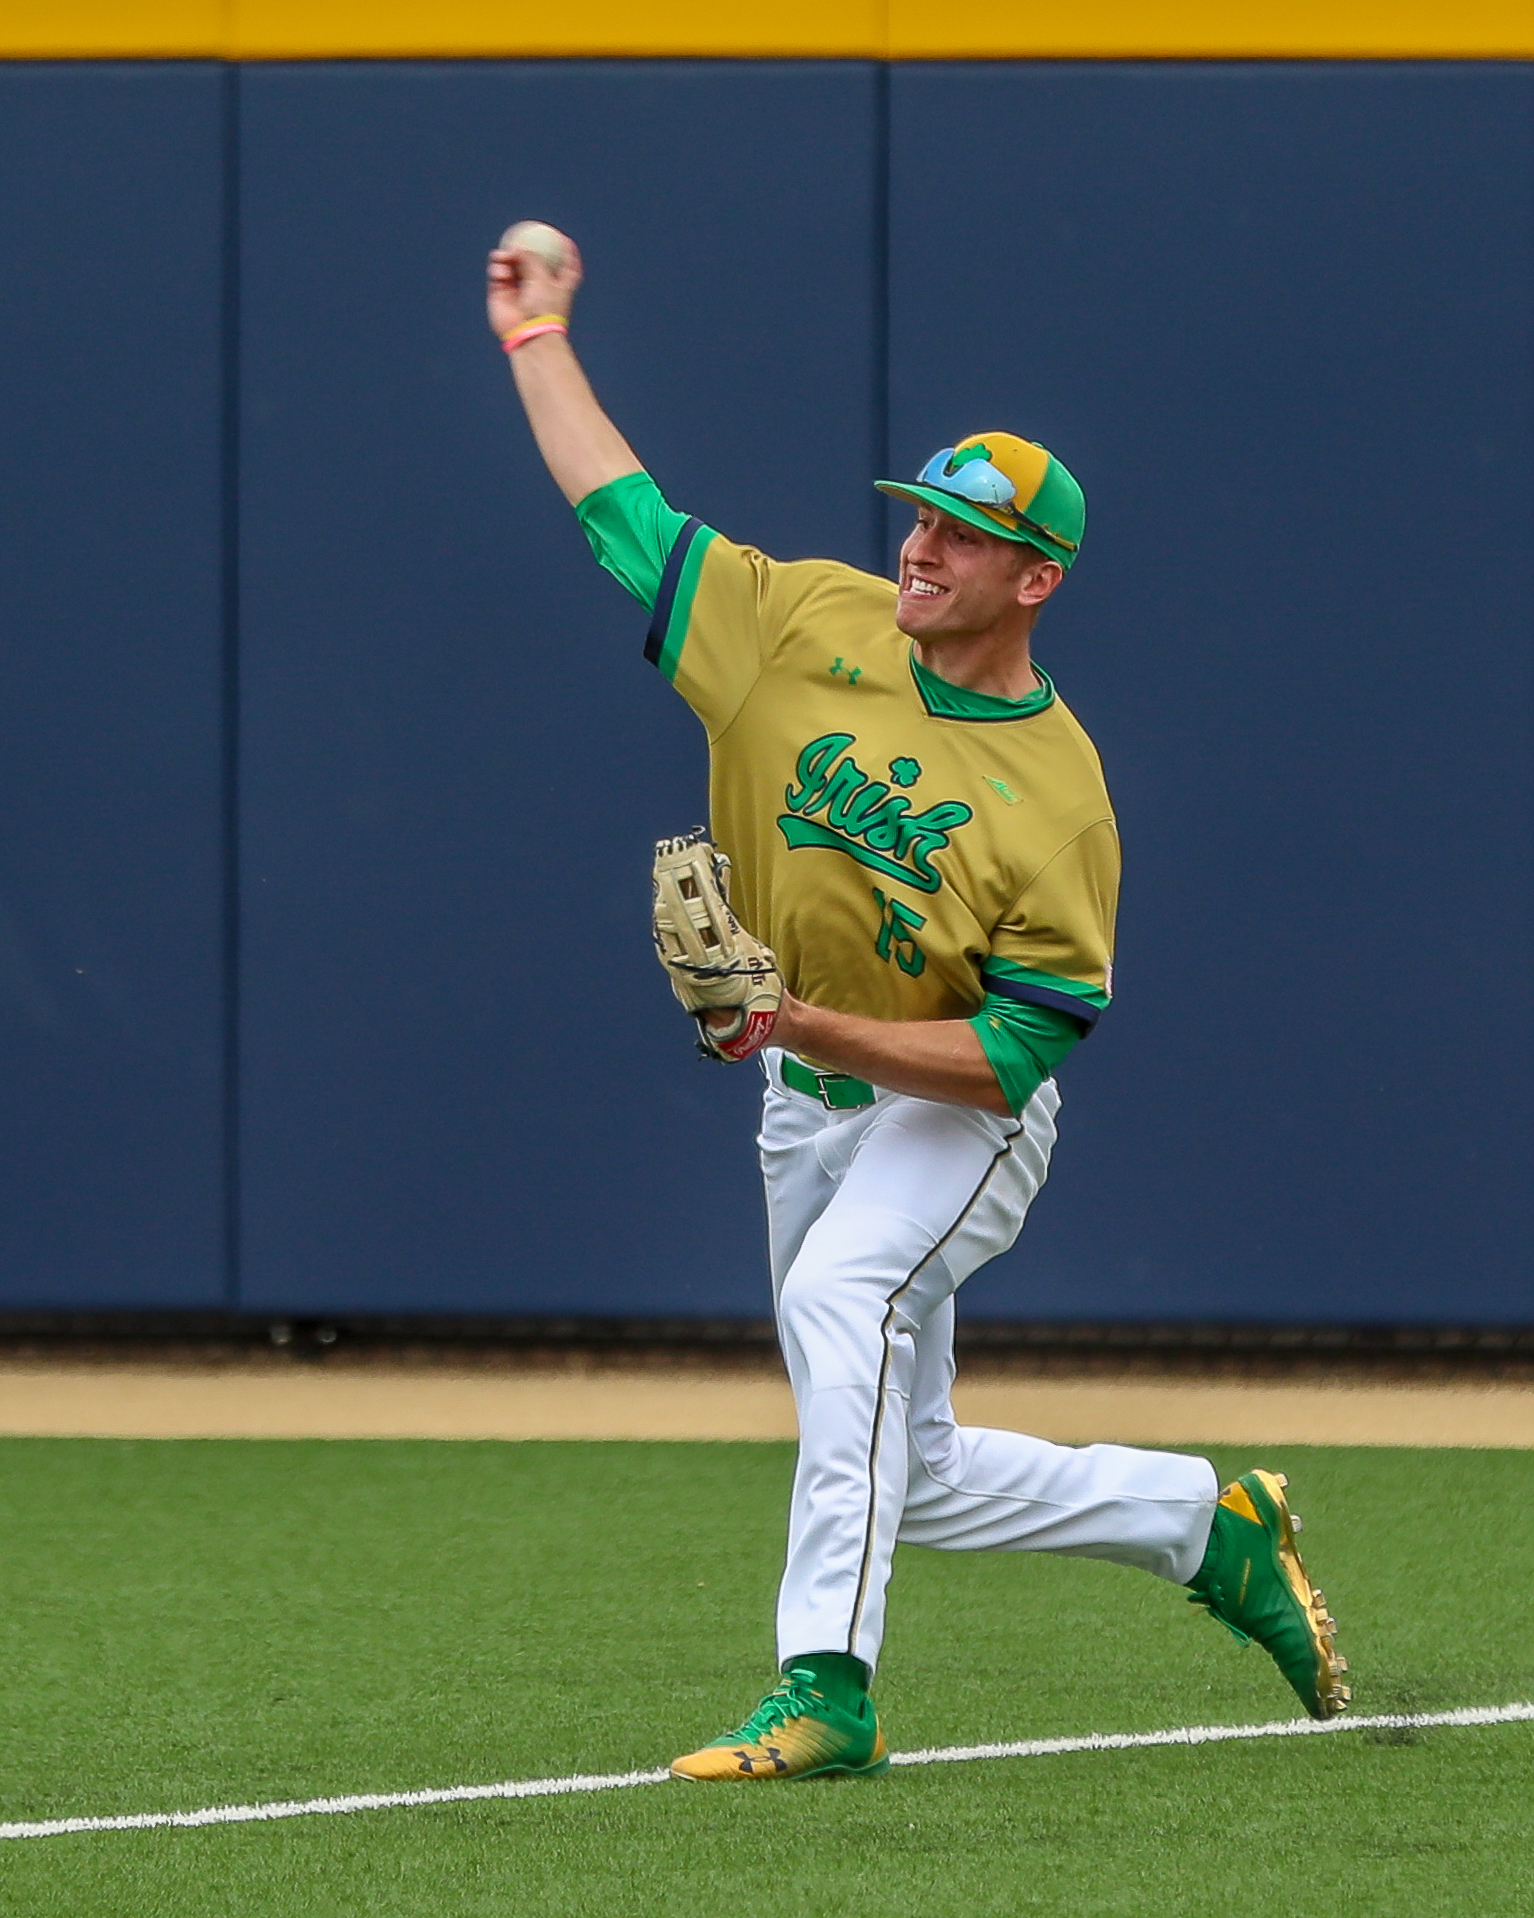 Notre Dame releases 2019 Schedule - College Baseball Daily